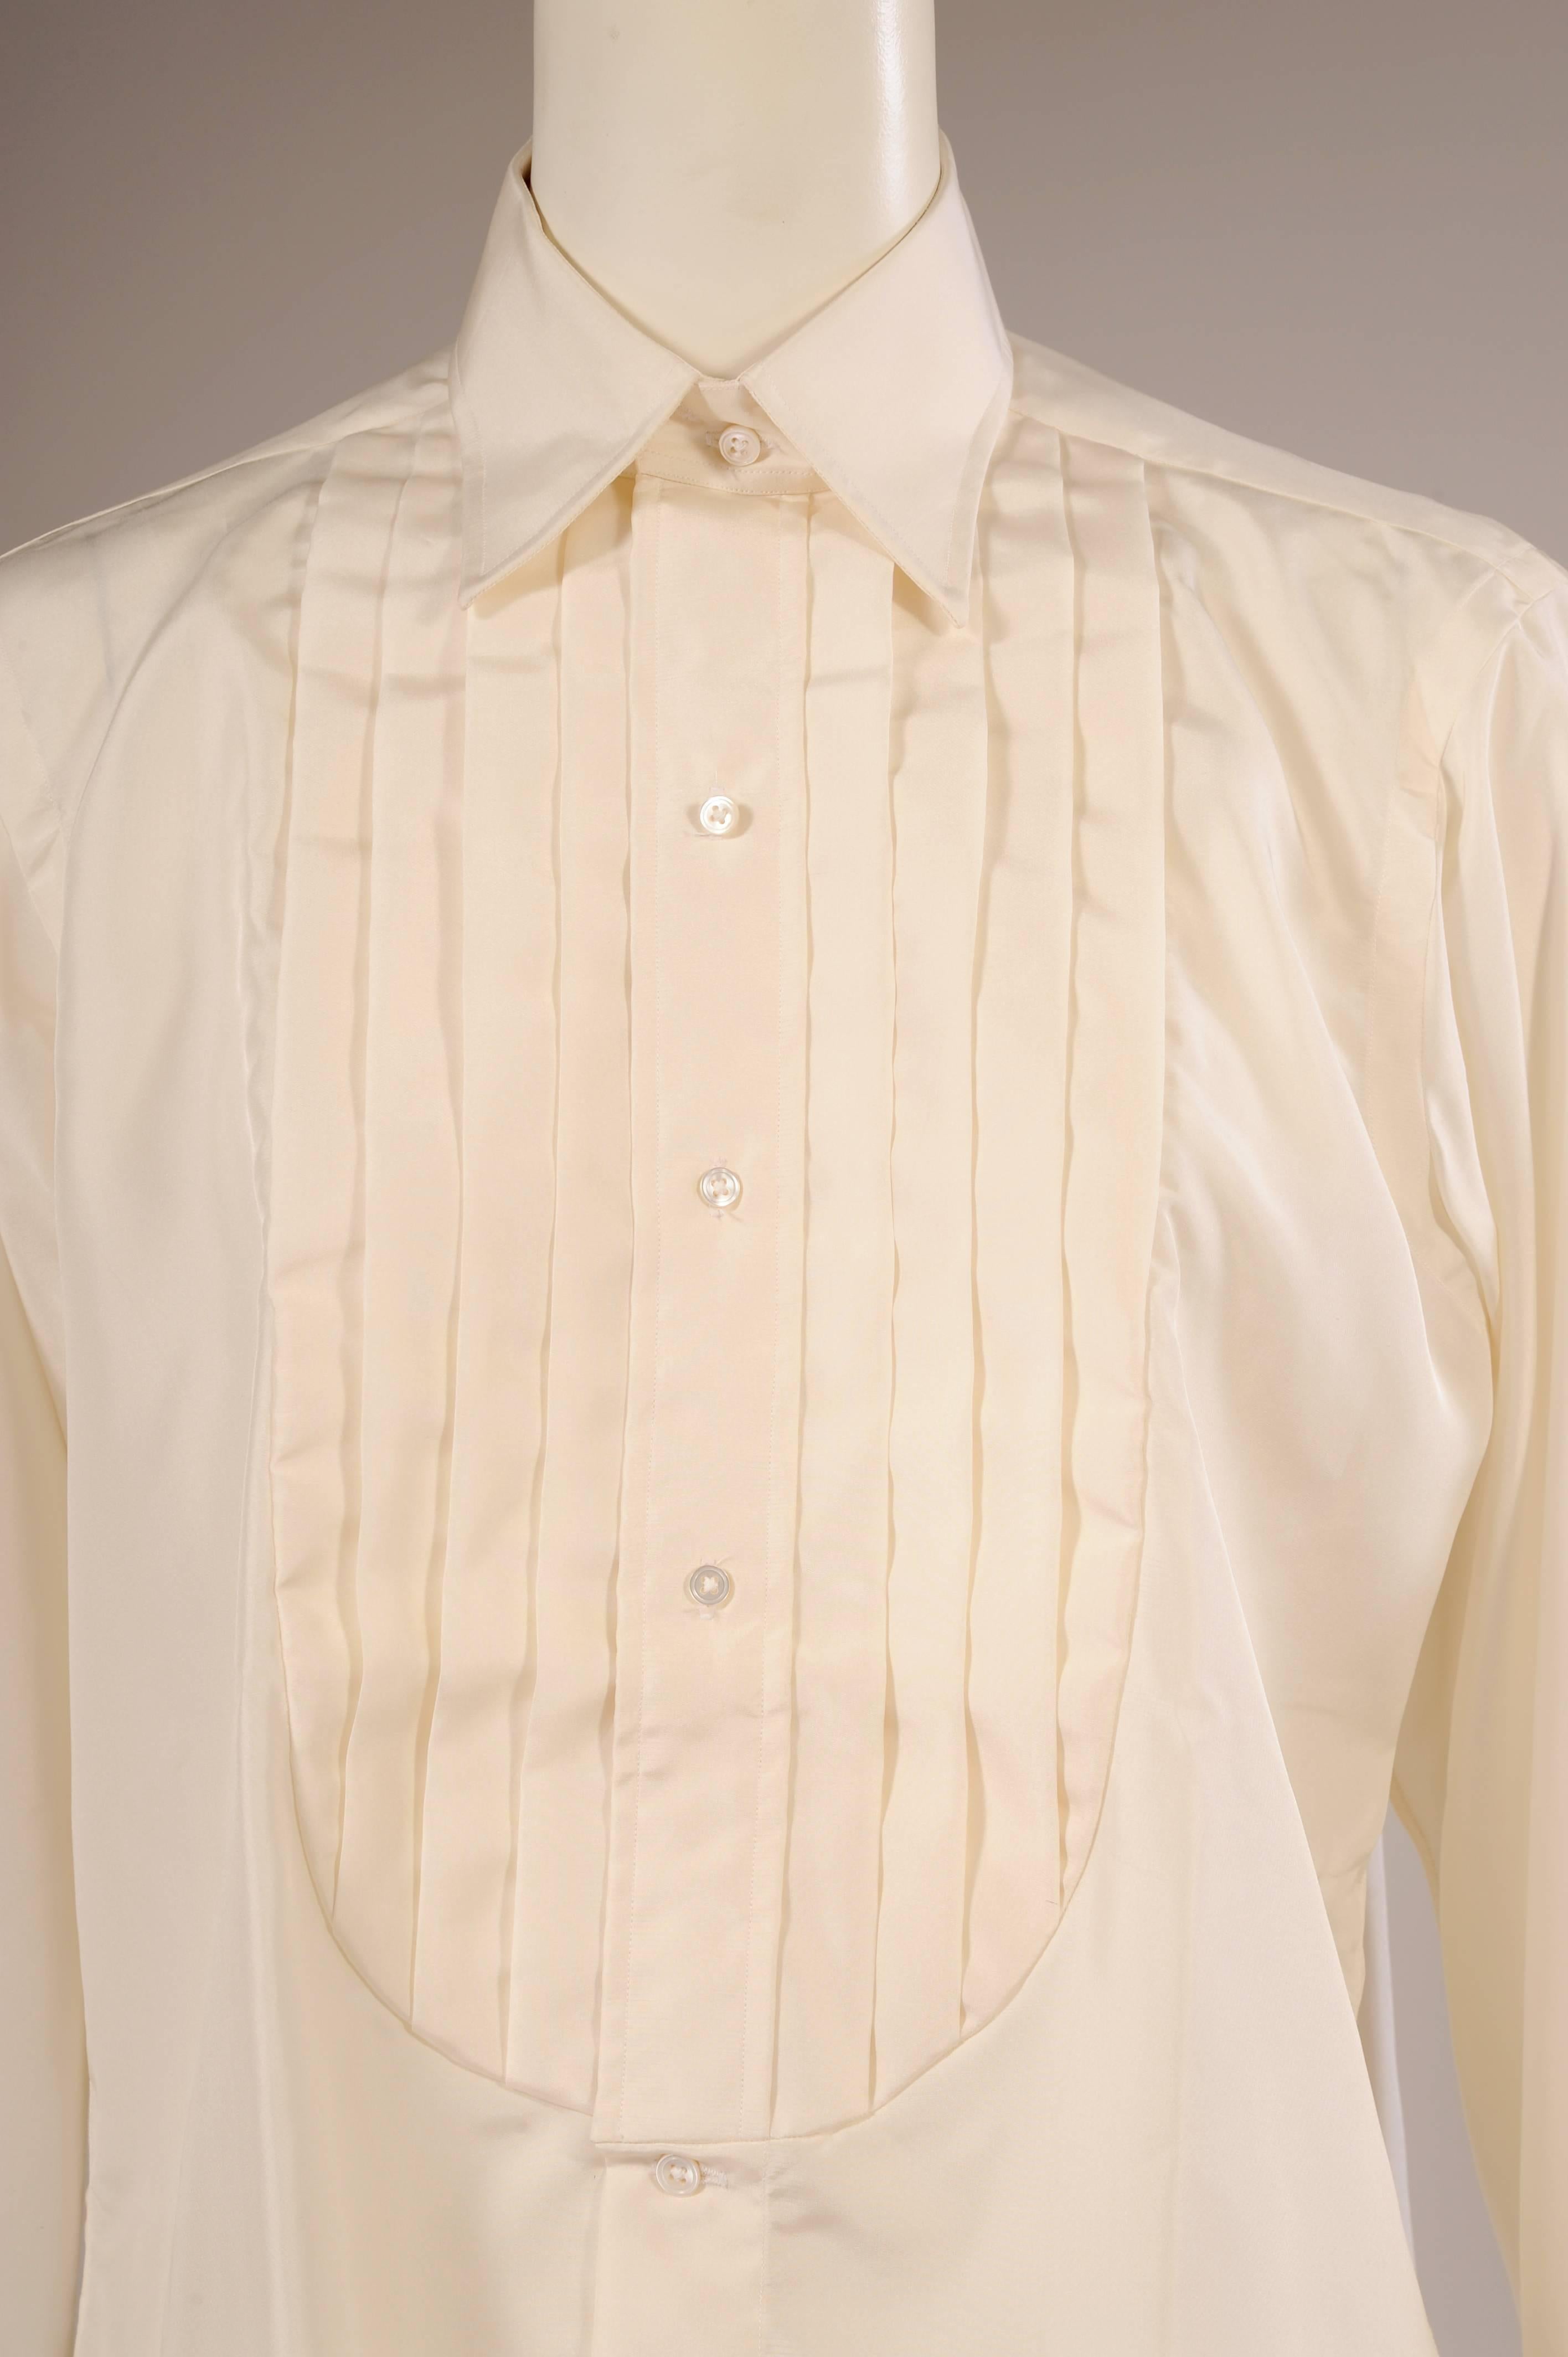 This beautiful silk shirt with a pleated tuxedo front and French cuffs was made by Browning Arundel & Co. in London. Never worn it is in excellent condition.
Measurements;
Shoulders 18